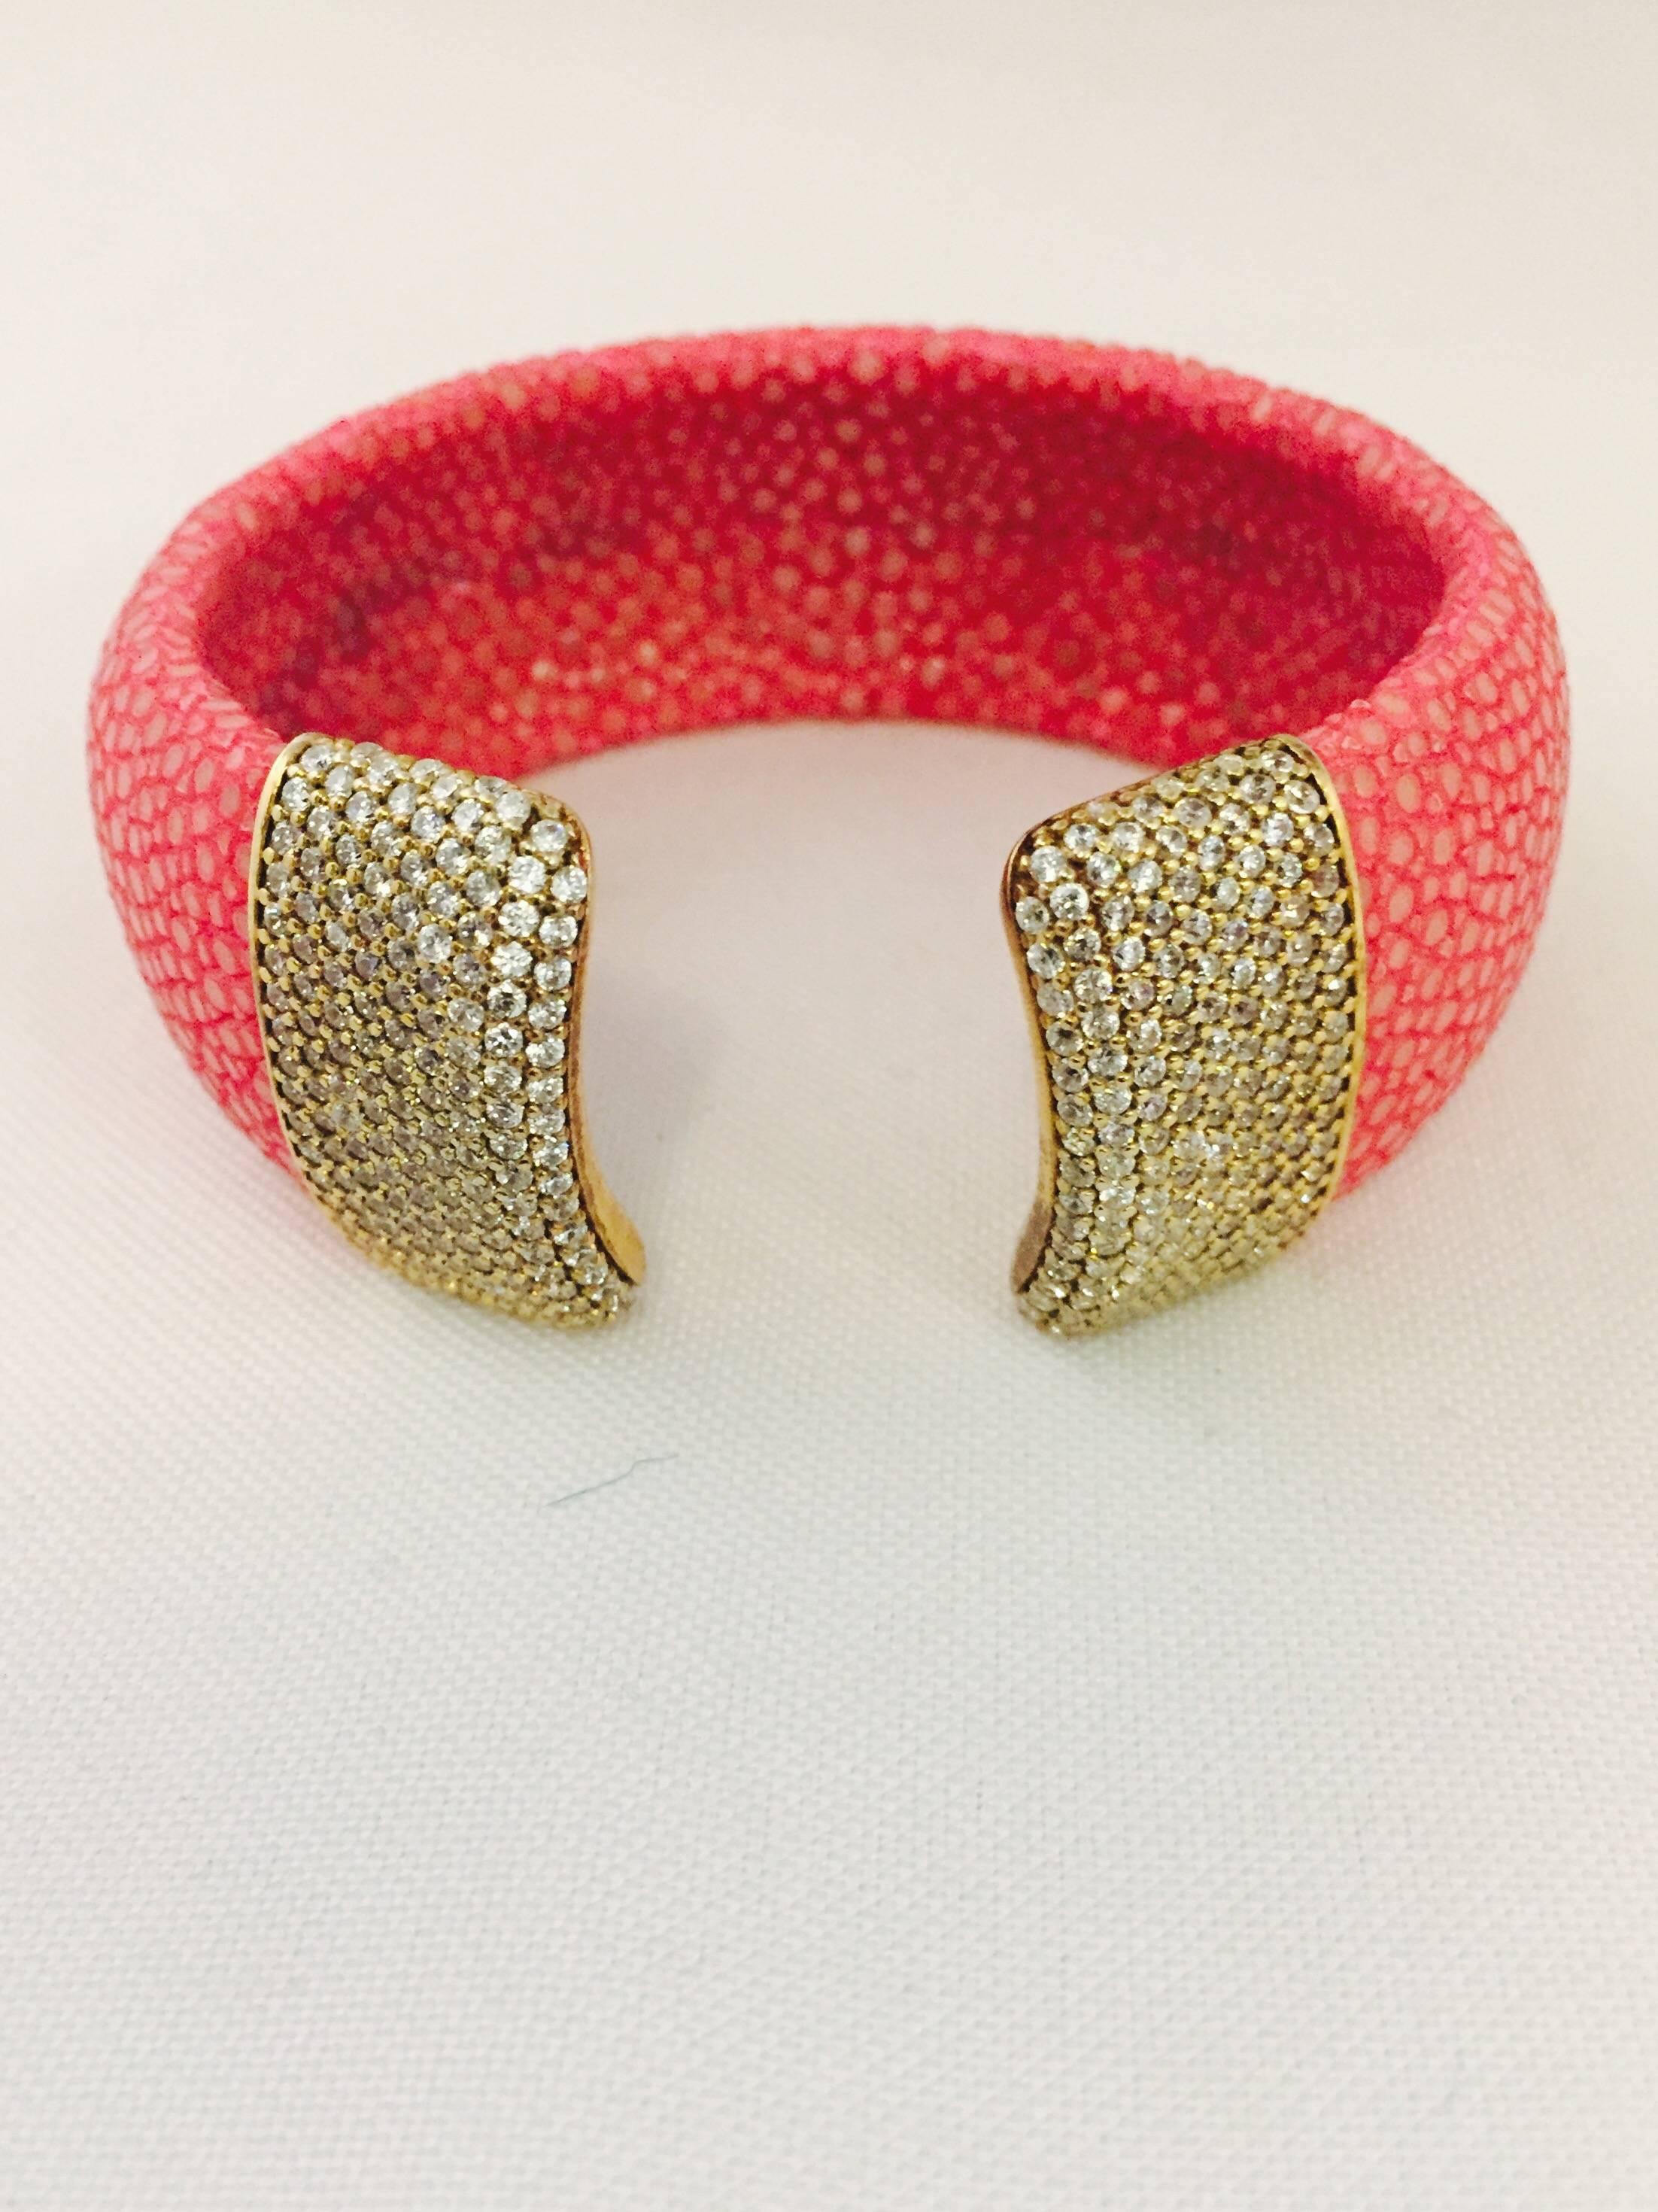 D. Dream has fabricated this shagreen cuff in hot pink!  So very today!  Each open end is capped in gold tone encrusted with Swarovsky crystals.  Casual or formal this eye catching cuff would be a fantastic addition to your jewelry wardrobe. 